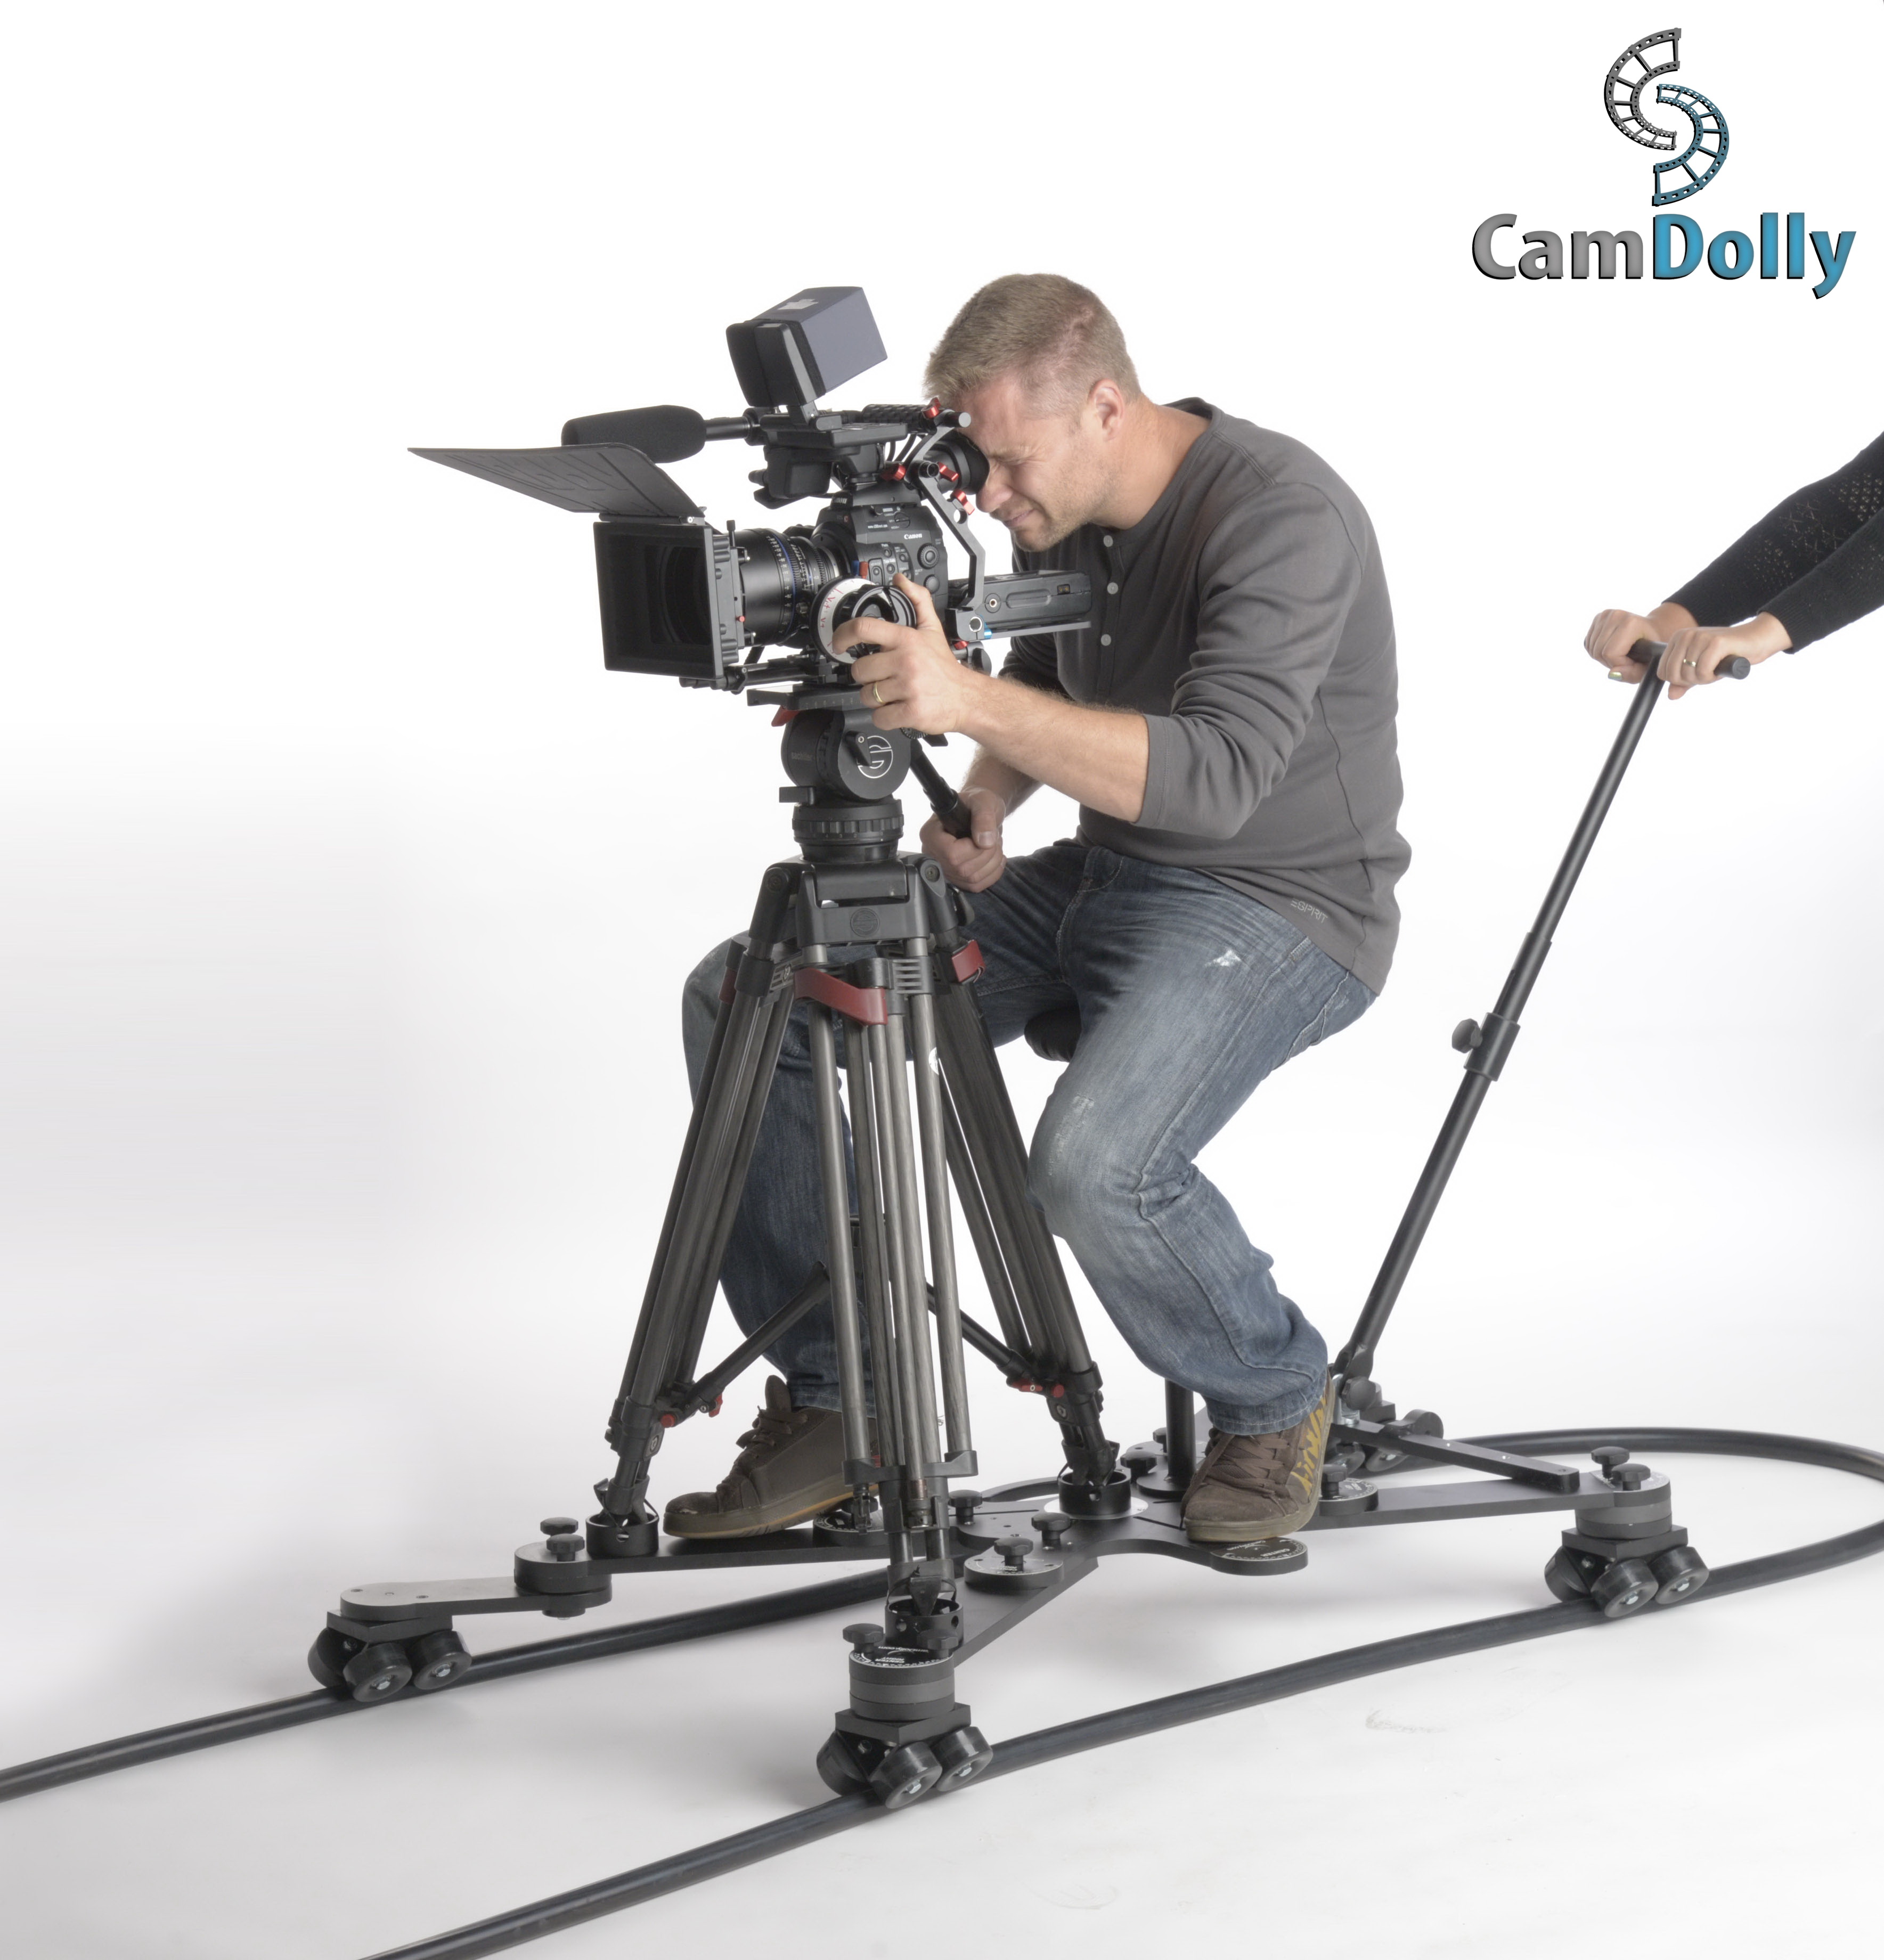 Camdolly Cinema System Campaign Launches On Kickstarter Promises The